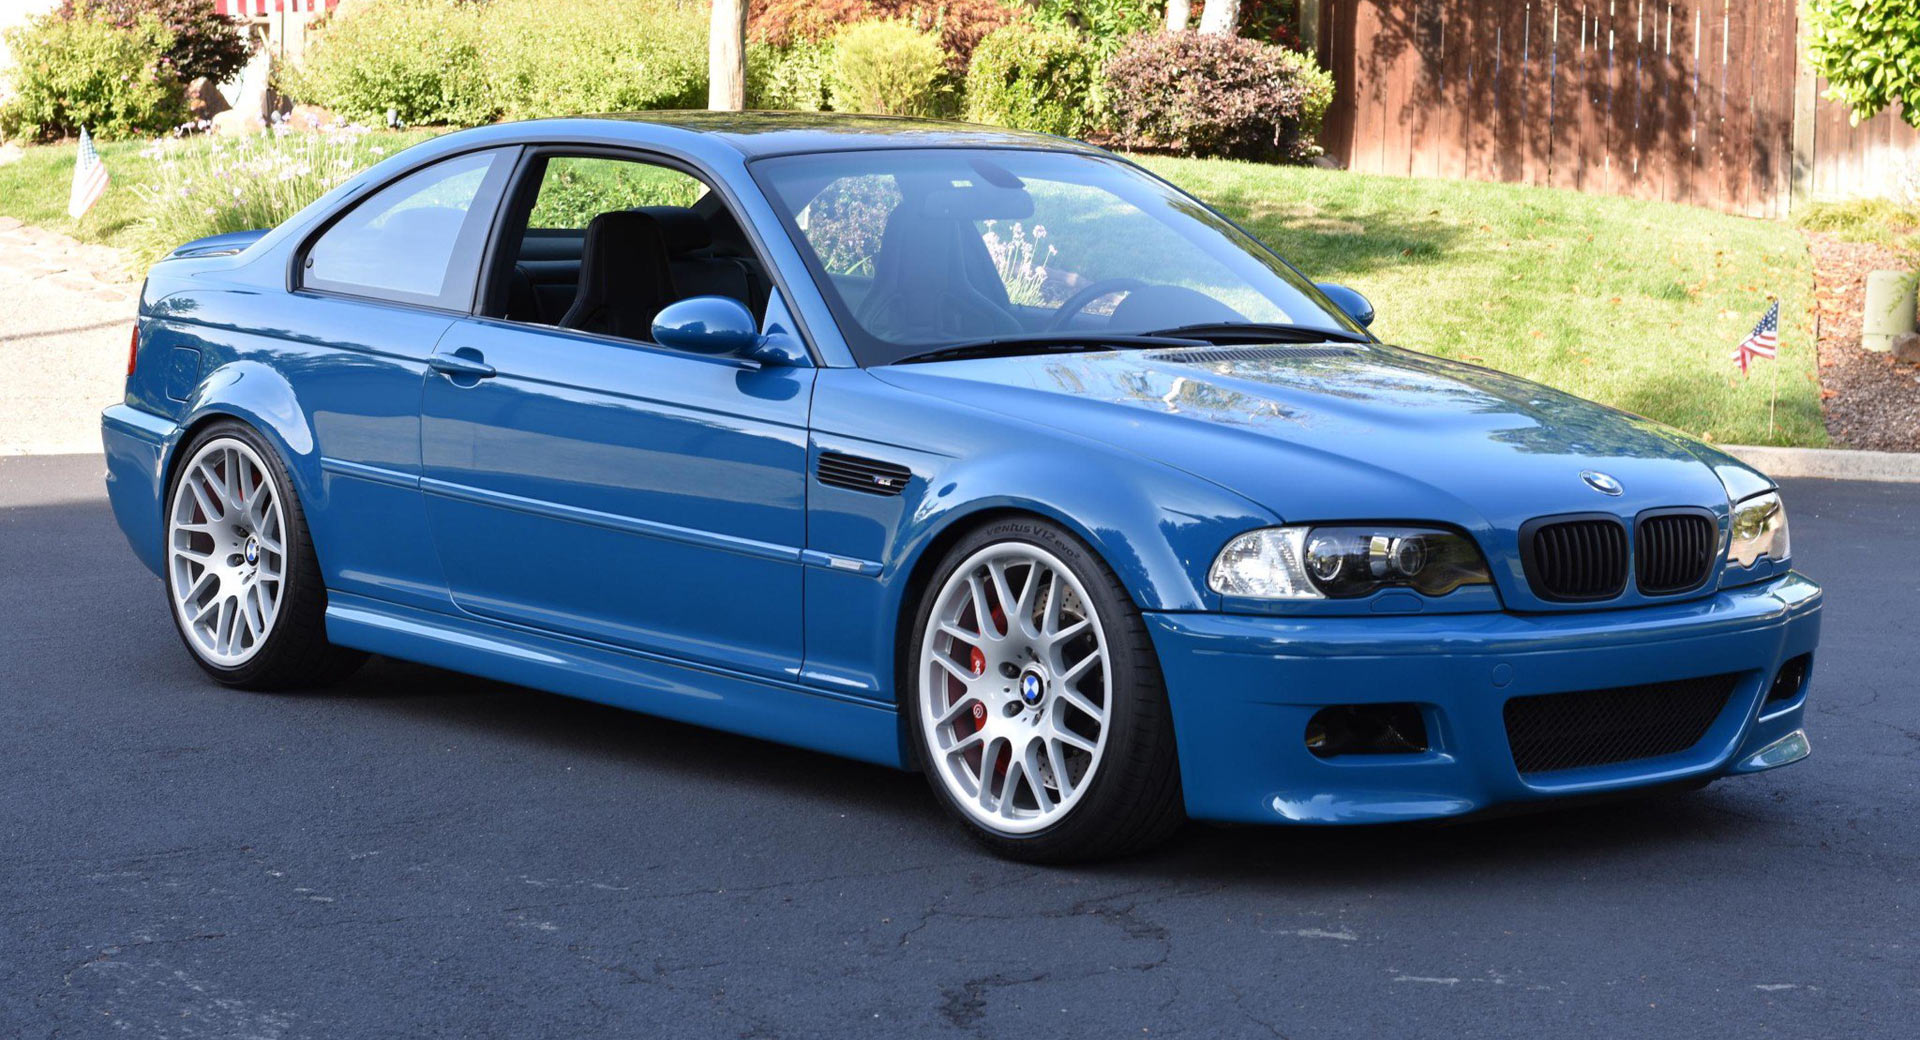 BMW E46 M3: My experience owning the iconic youngtimer